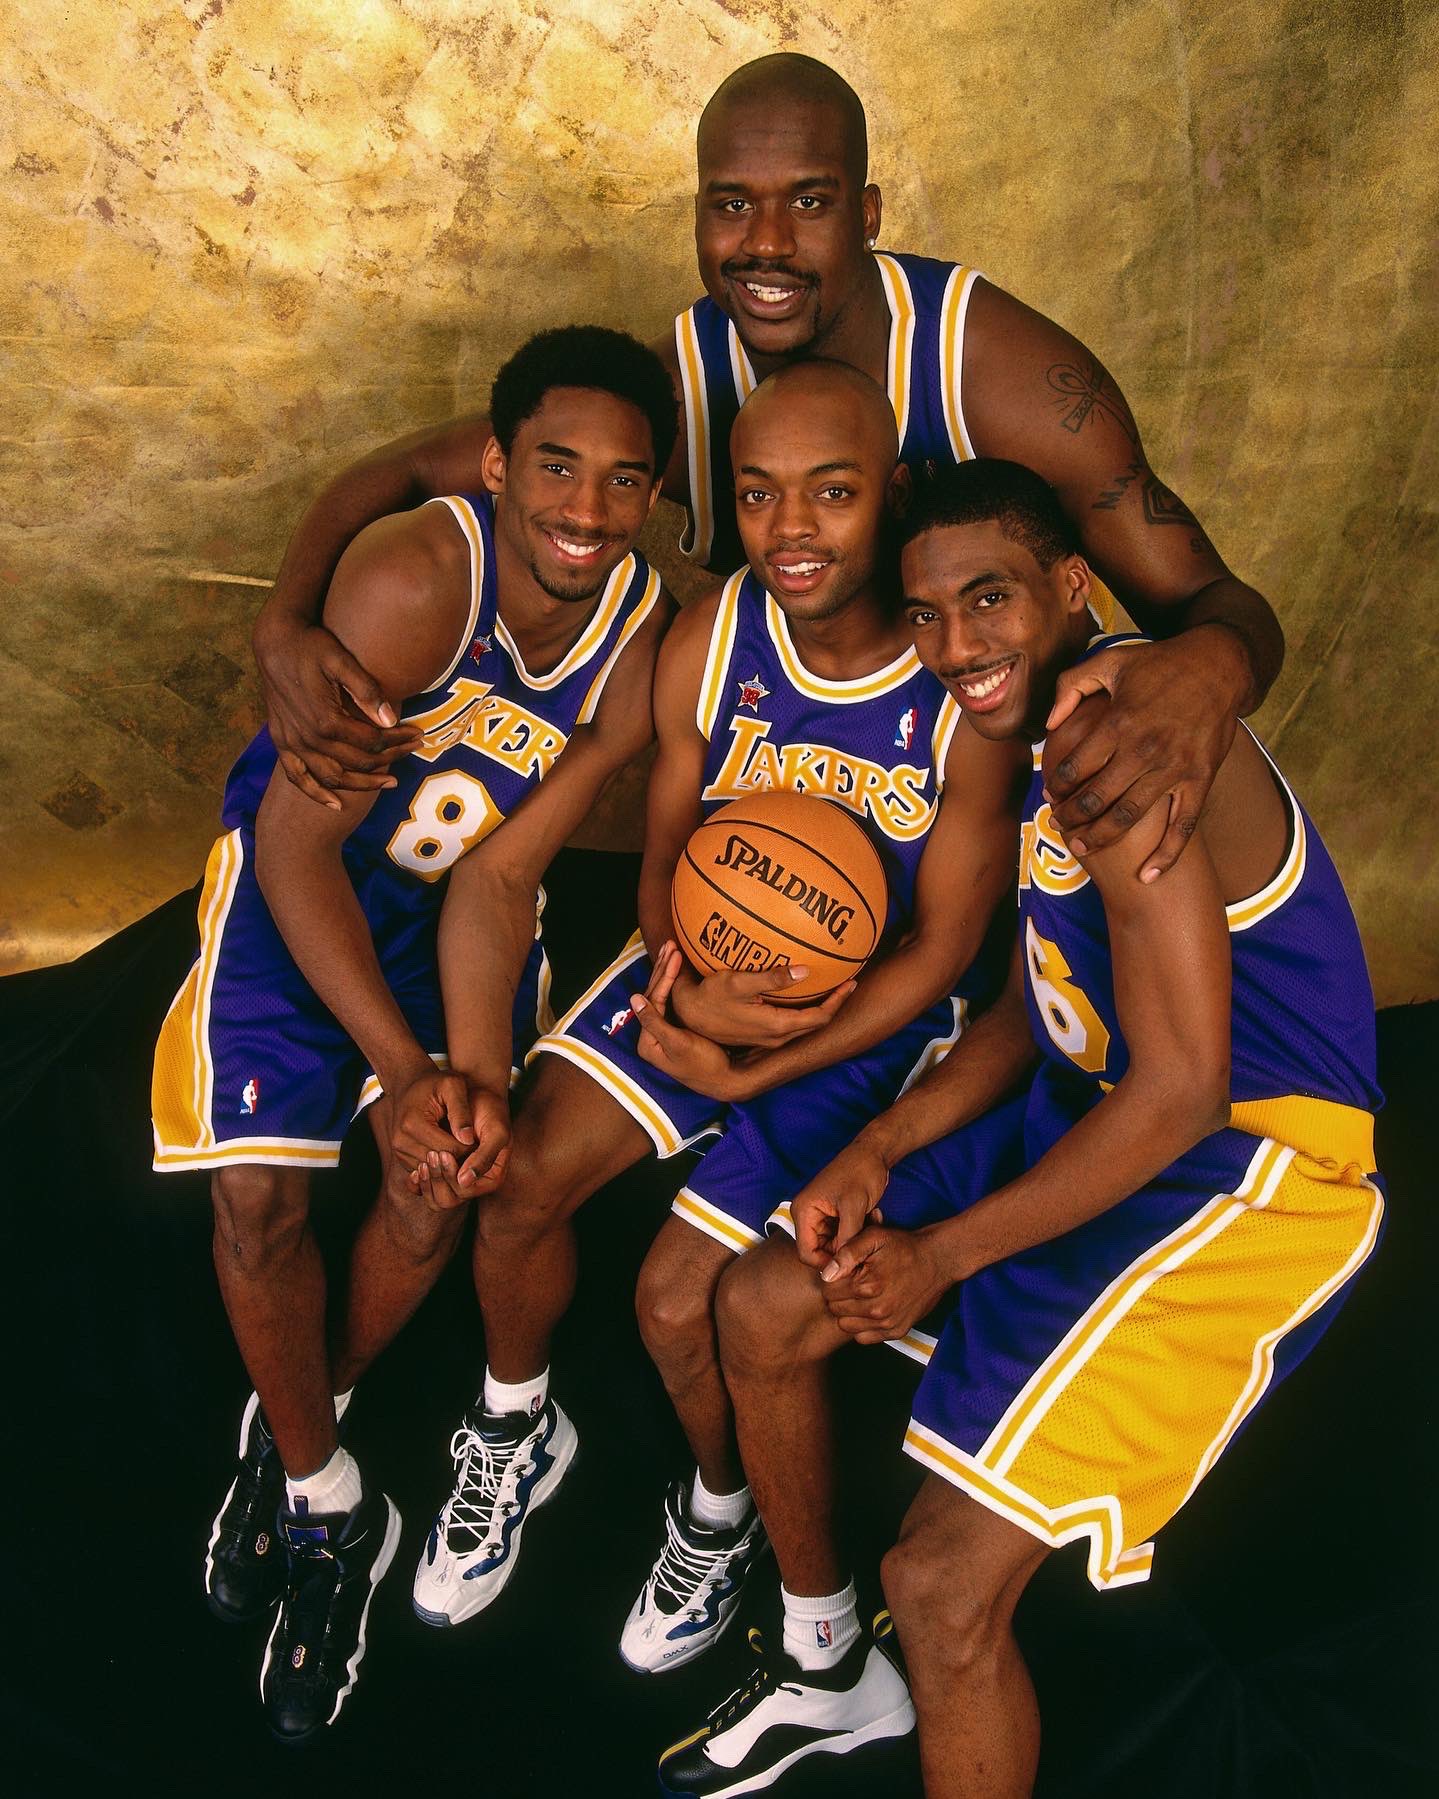 The 'Players from 1998 NBA All-Star game